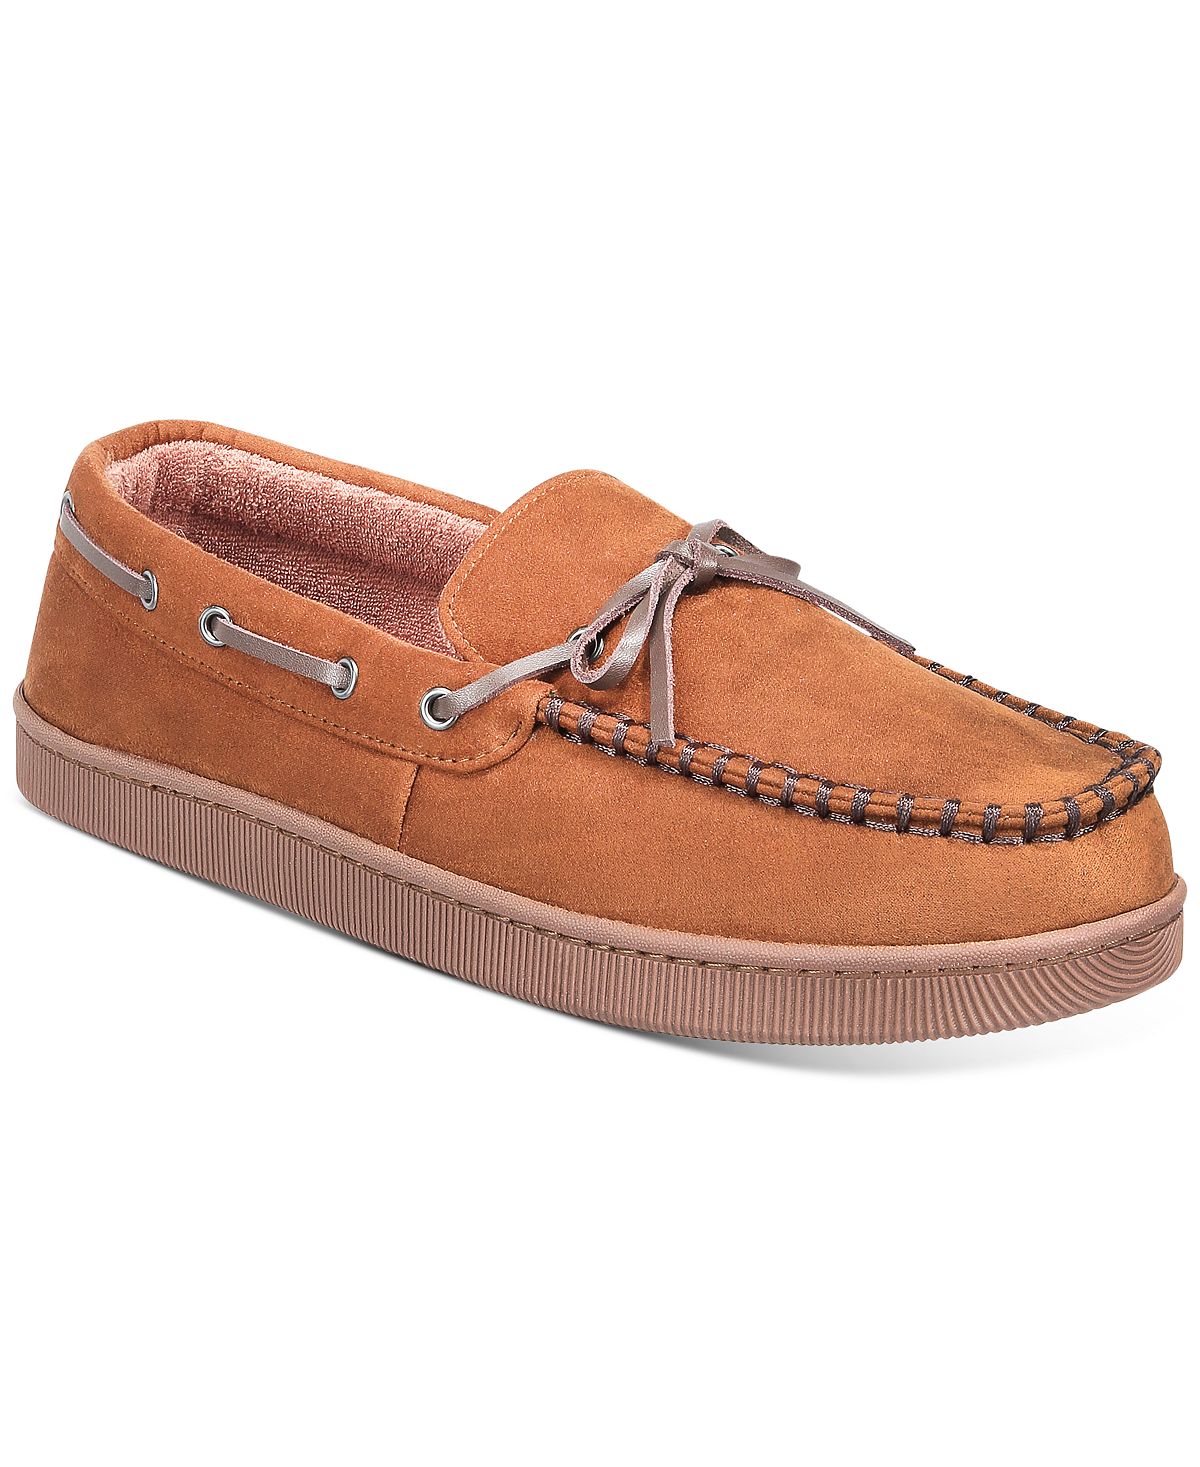 Club Room Moccasin Slippers Tan